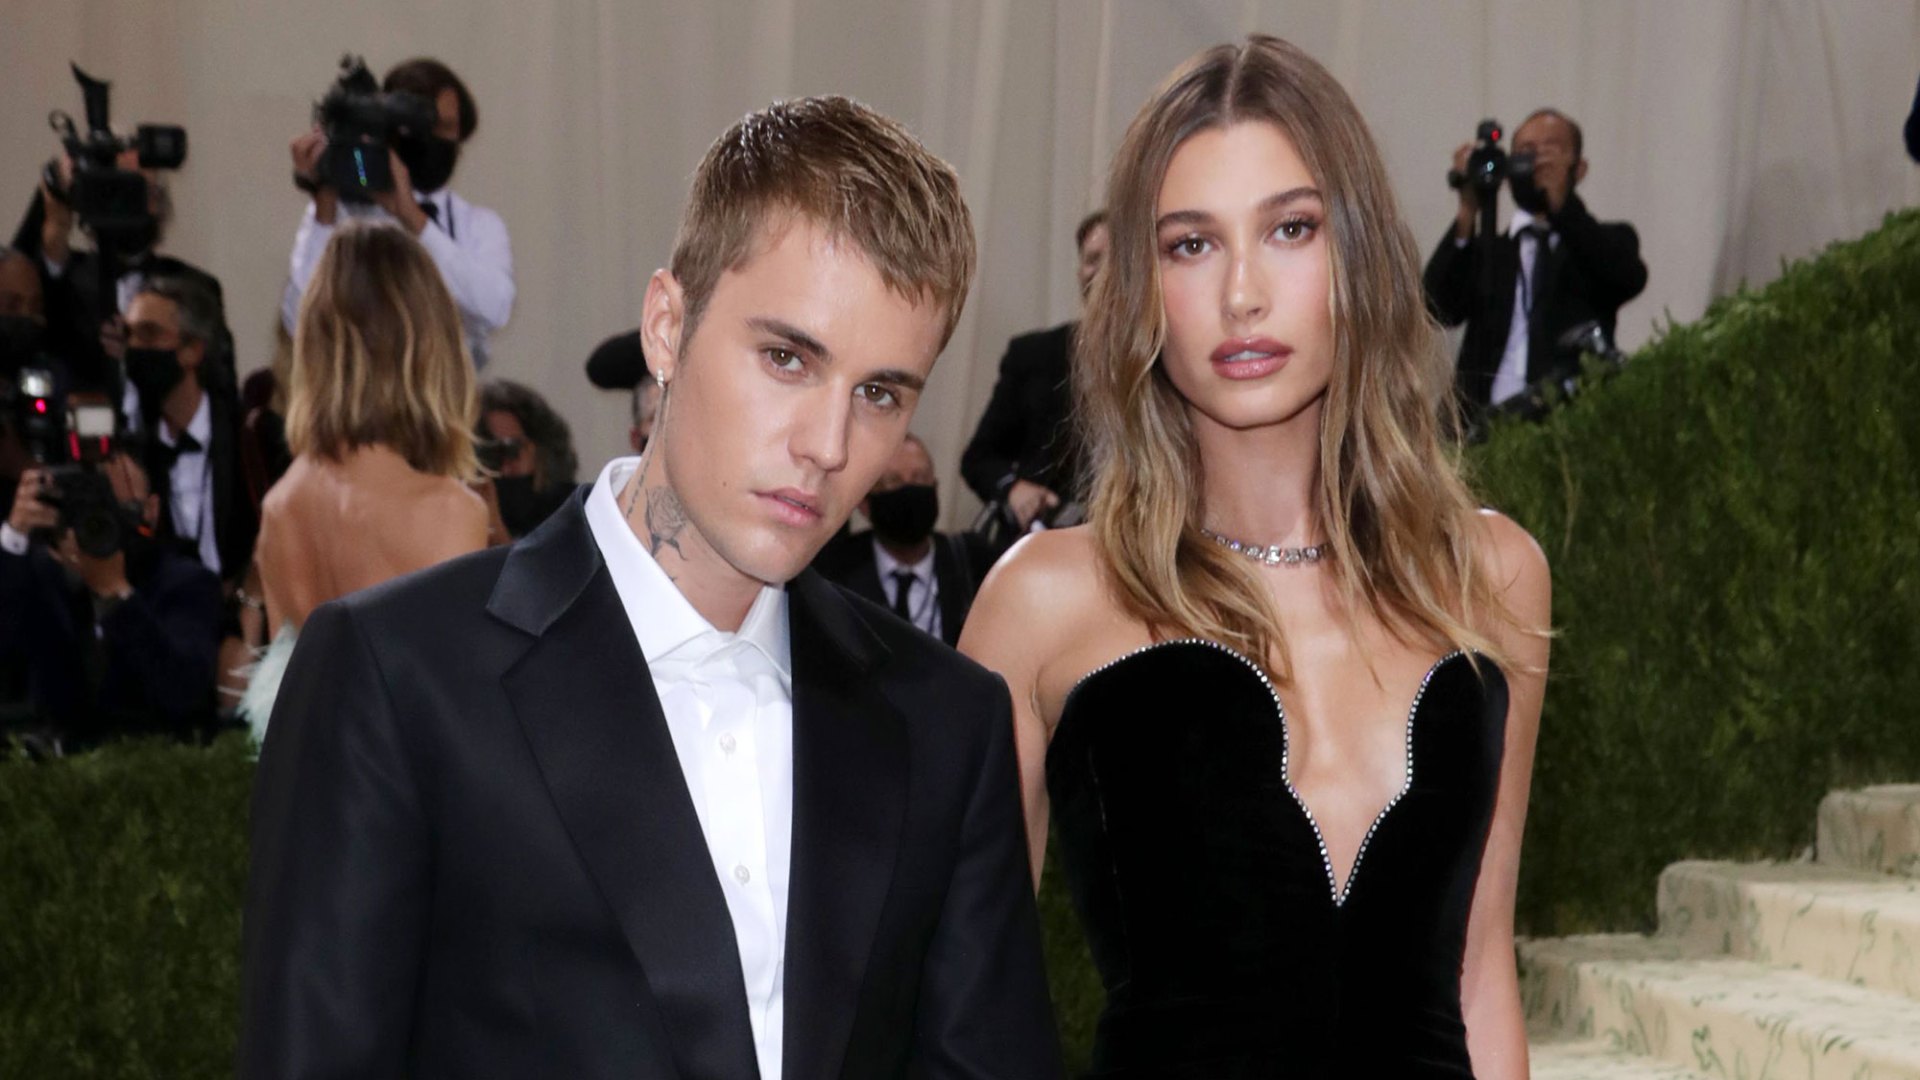 Justin Bieber's Family: Meet His Parents and His Younger Siblings